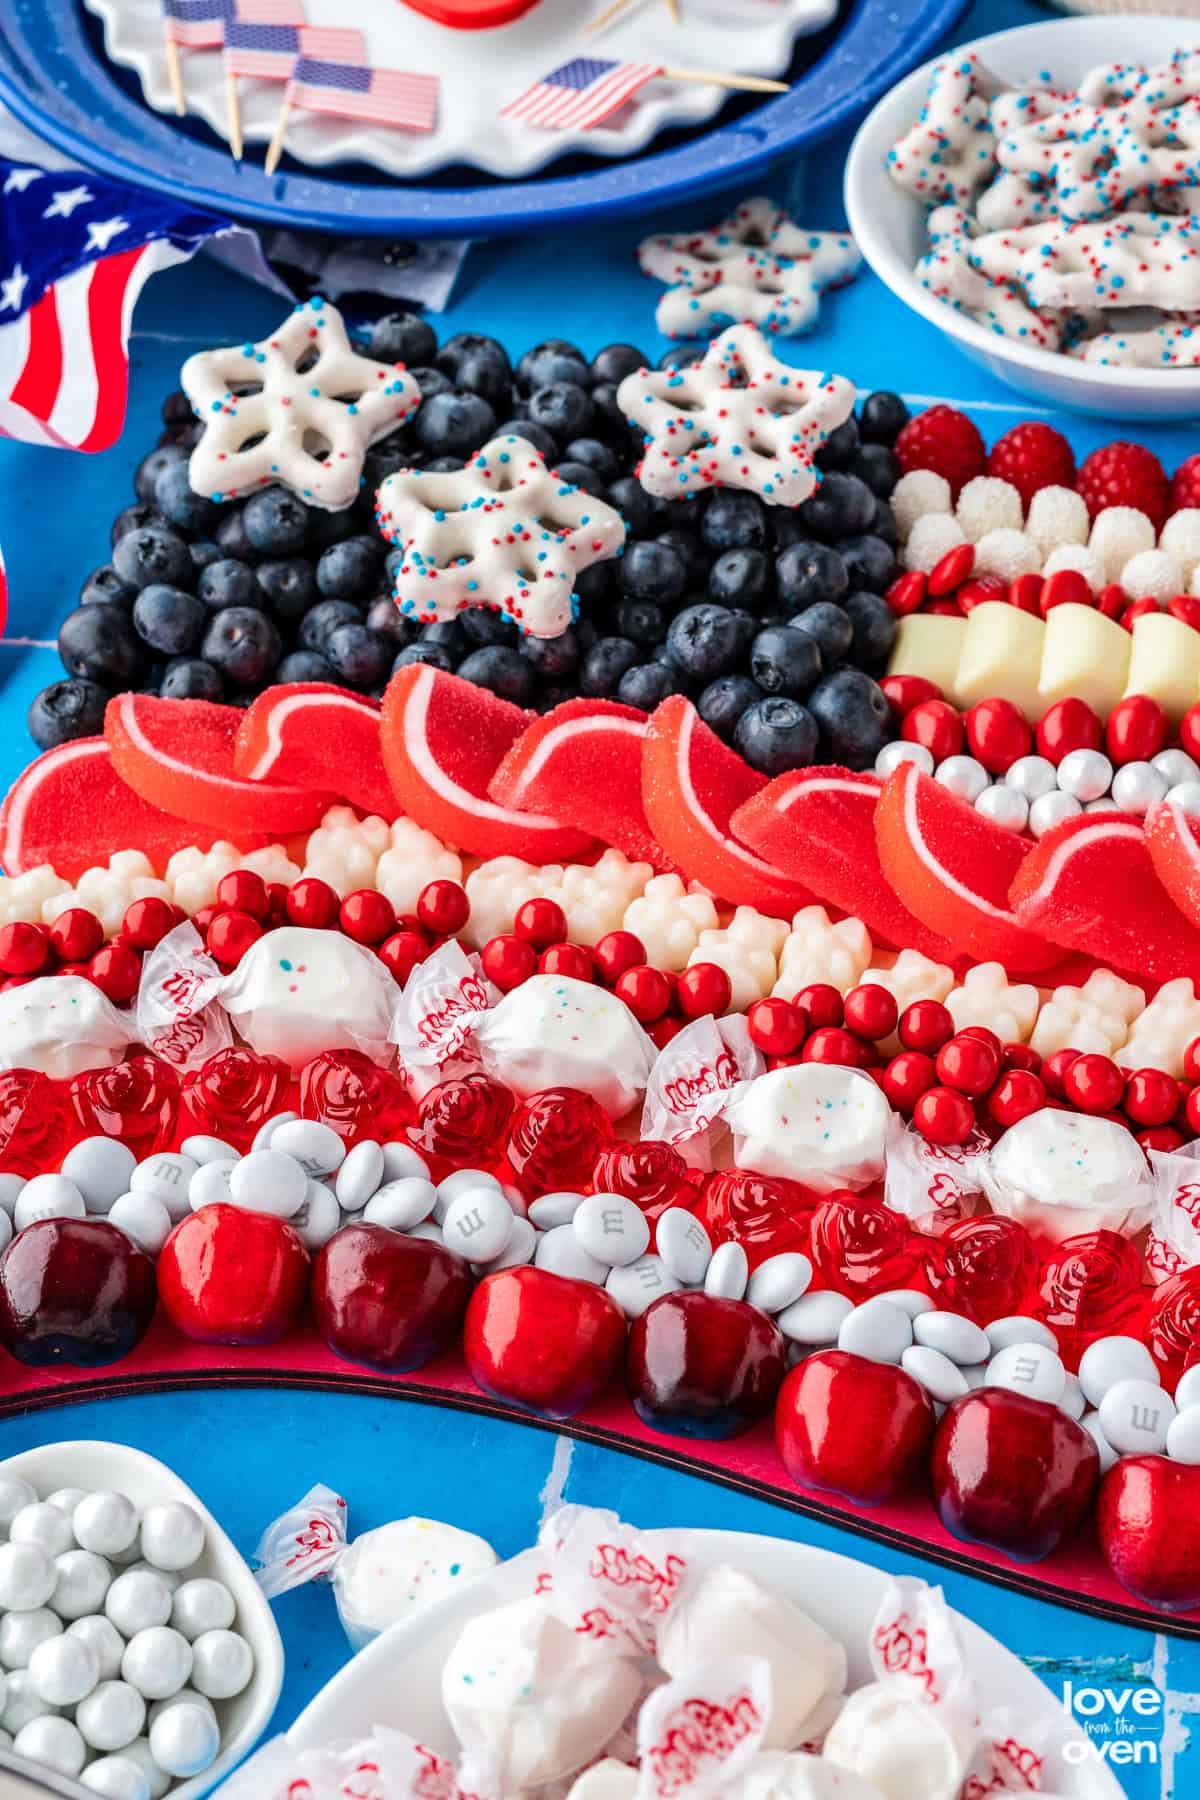 A candy charcuterie made to look like an american flag